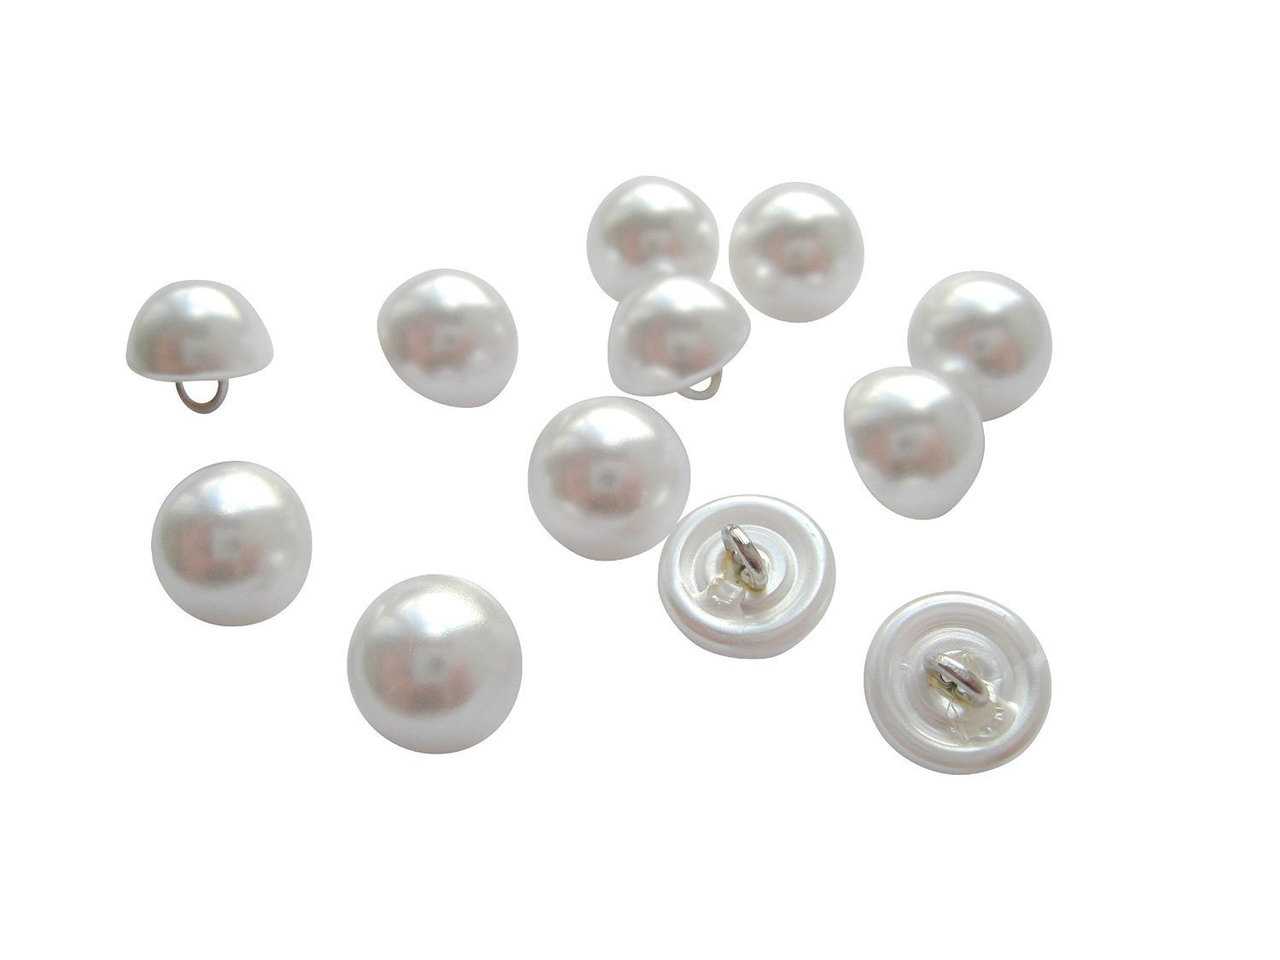 100pcs Half Round Pearl Buttons Small Buttons Vintage Pearl Button DIY  Shirt Buttons Engraved Buttons Faux Pearl Buttons Faux Pearl Embellishments